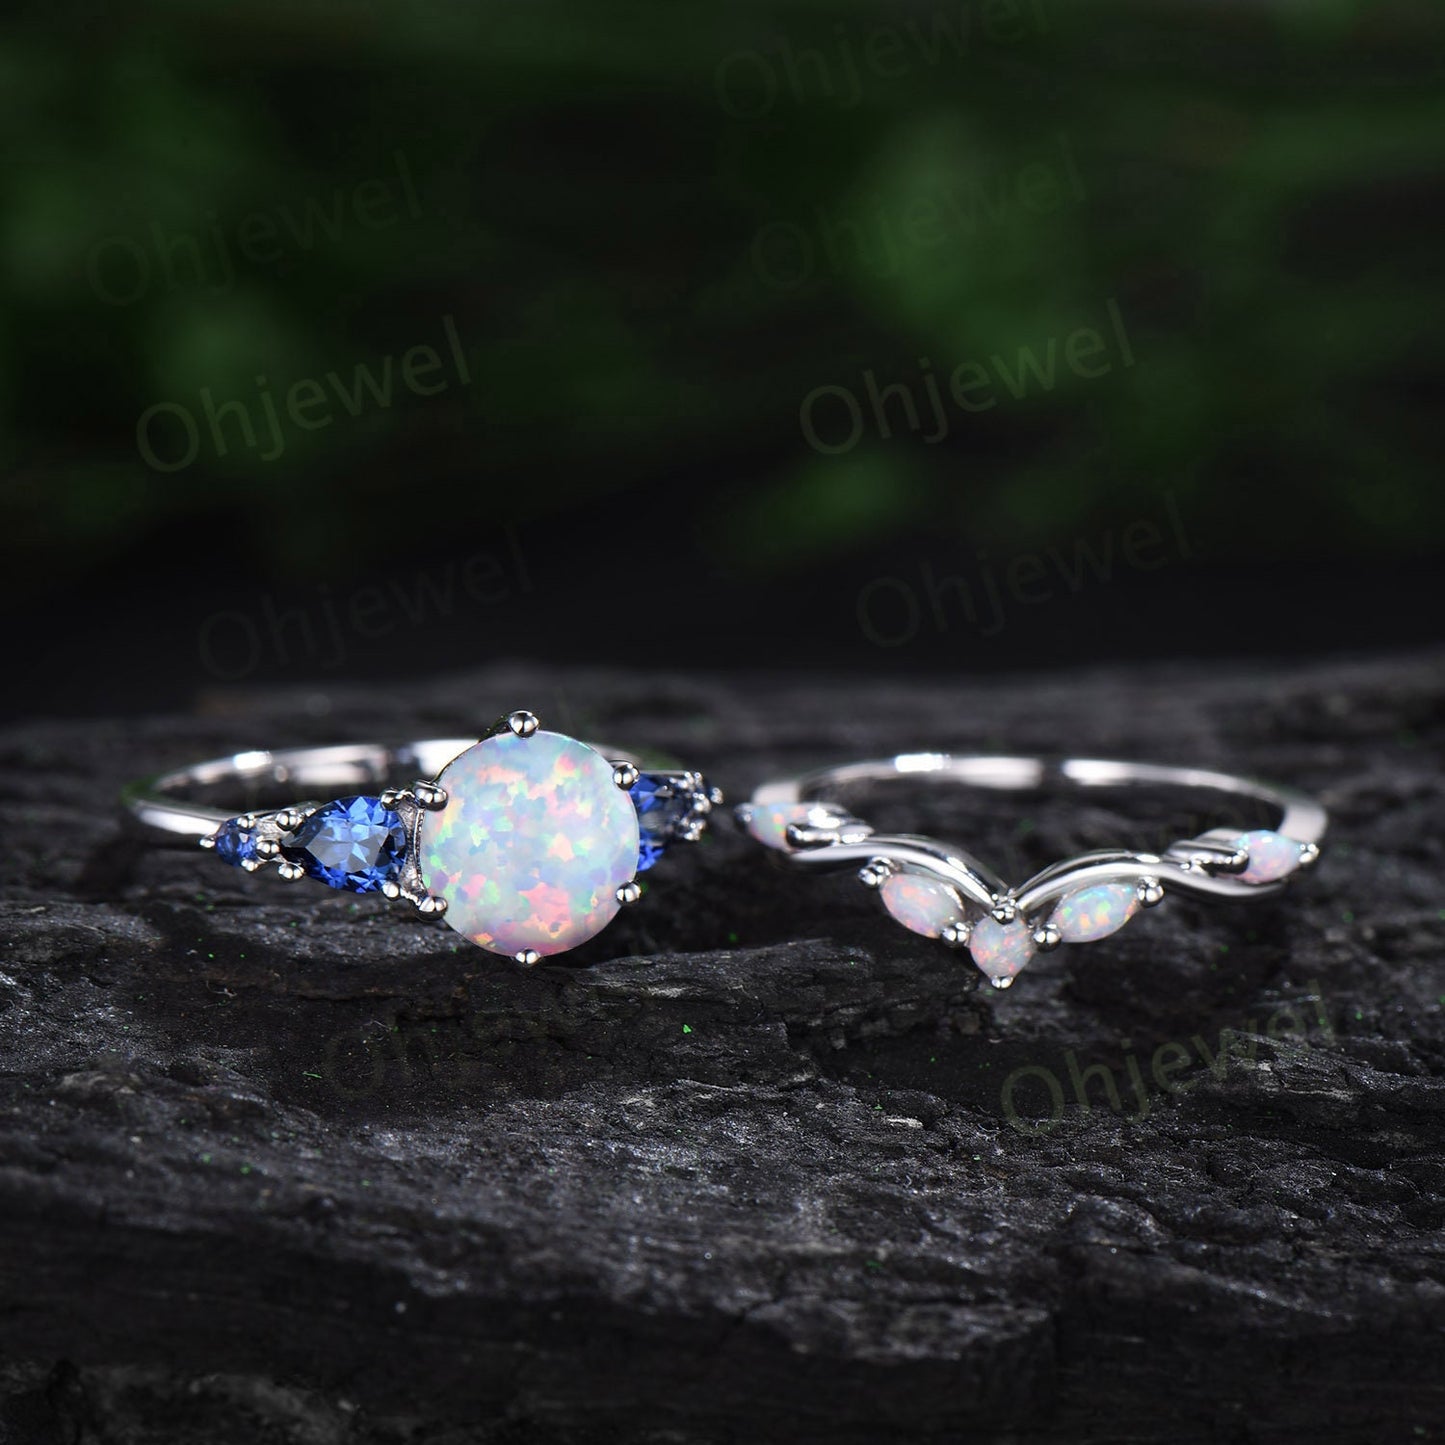 Round opal ring vintage five stone white gold unique engagement ring women pear sapphire ring 6 prong anniversary ring set gift jewelry